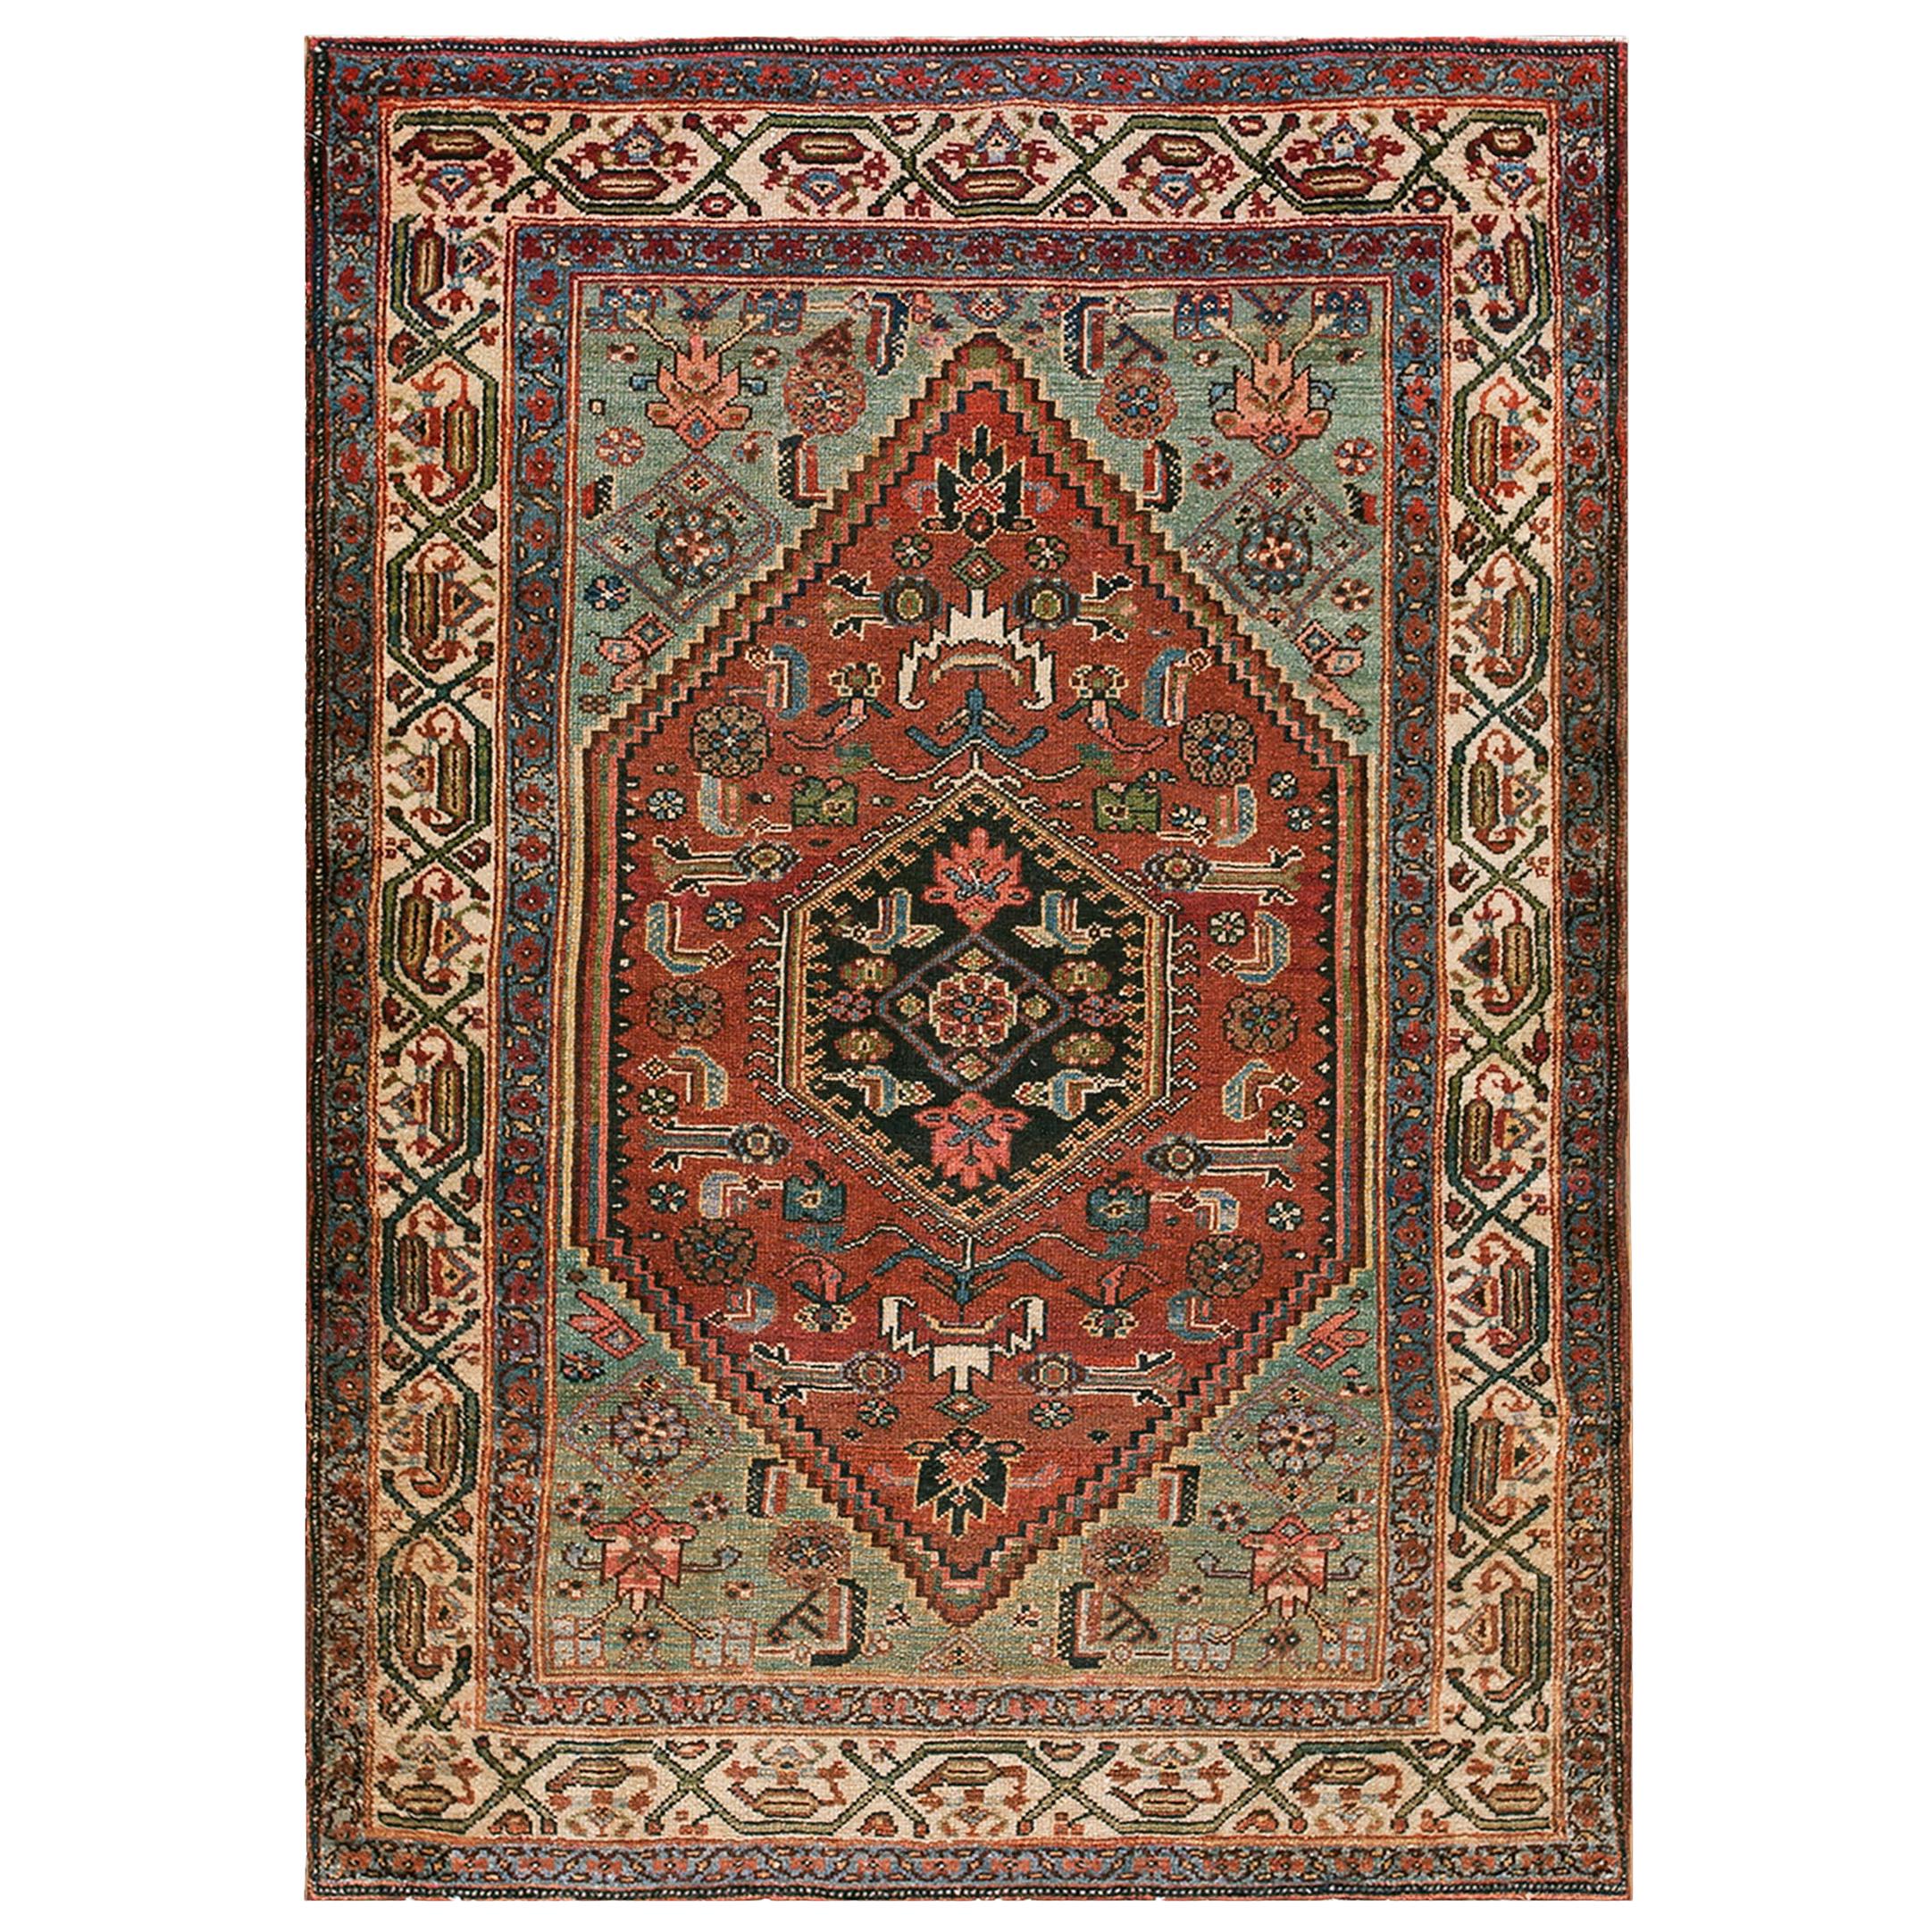 Early 20th Century Persian Malayer Carpet ( 3'4" x 4'10" - 102 x 147 ) For Sale